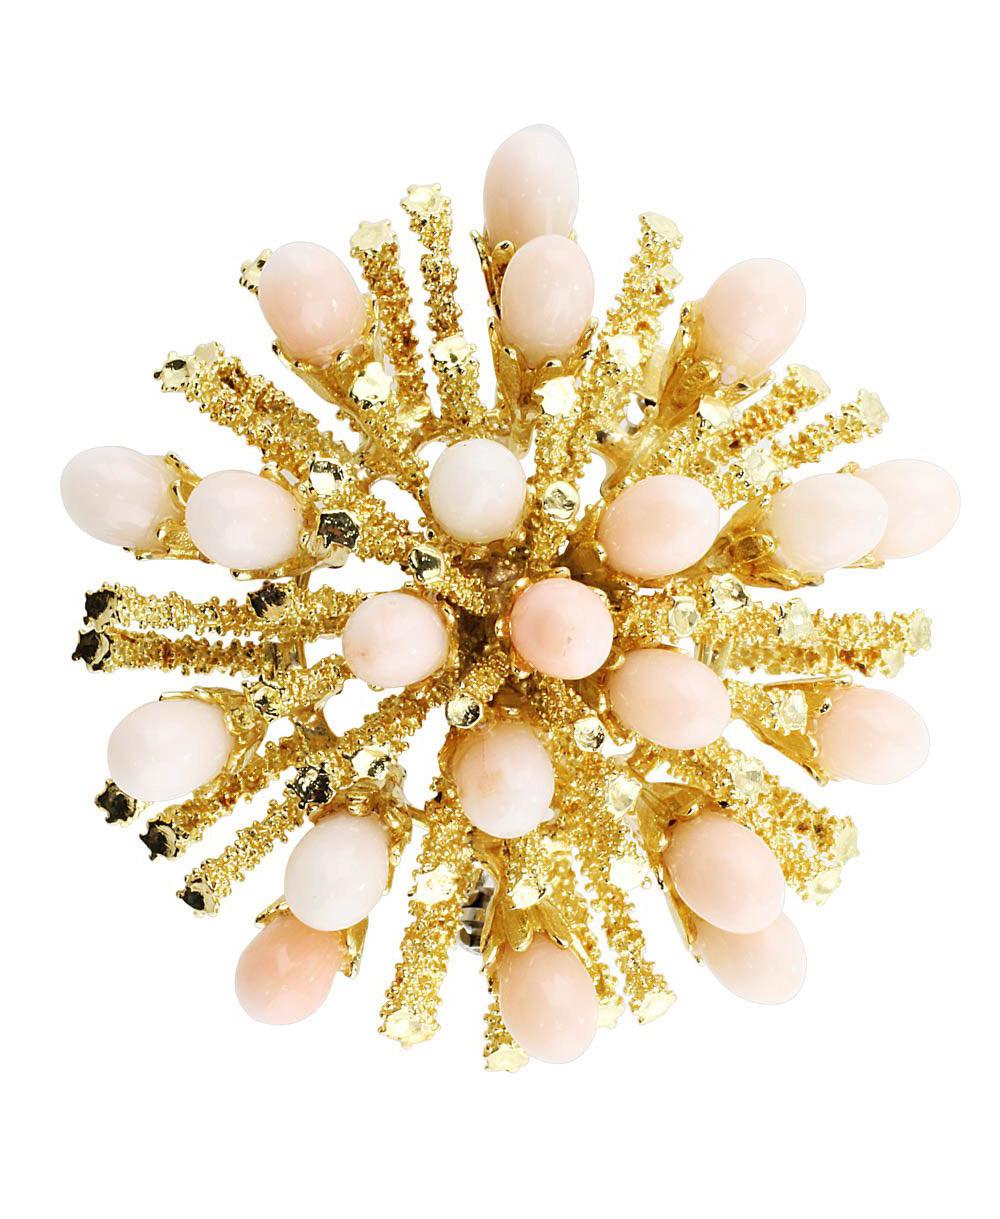 18 Karat Yellow Gold Angel Skin Coral Brooch In Excellent Condition For Sale In La Jolla, CA